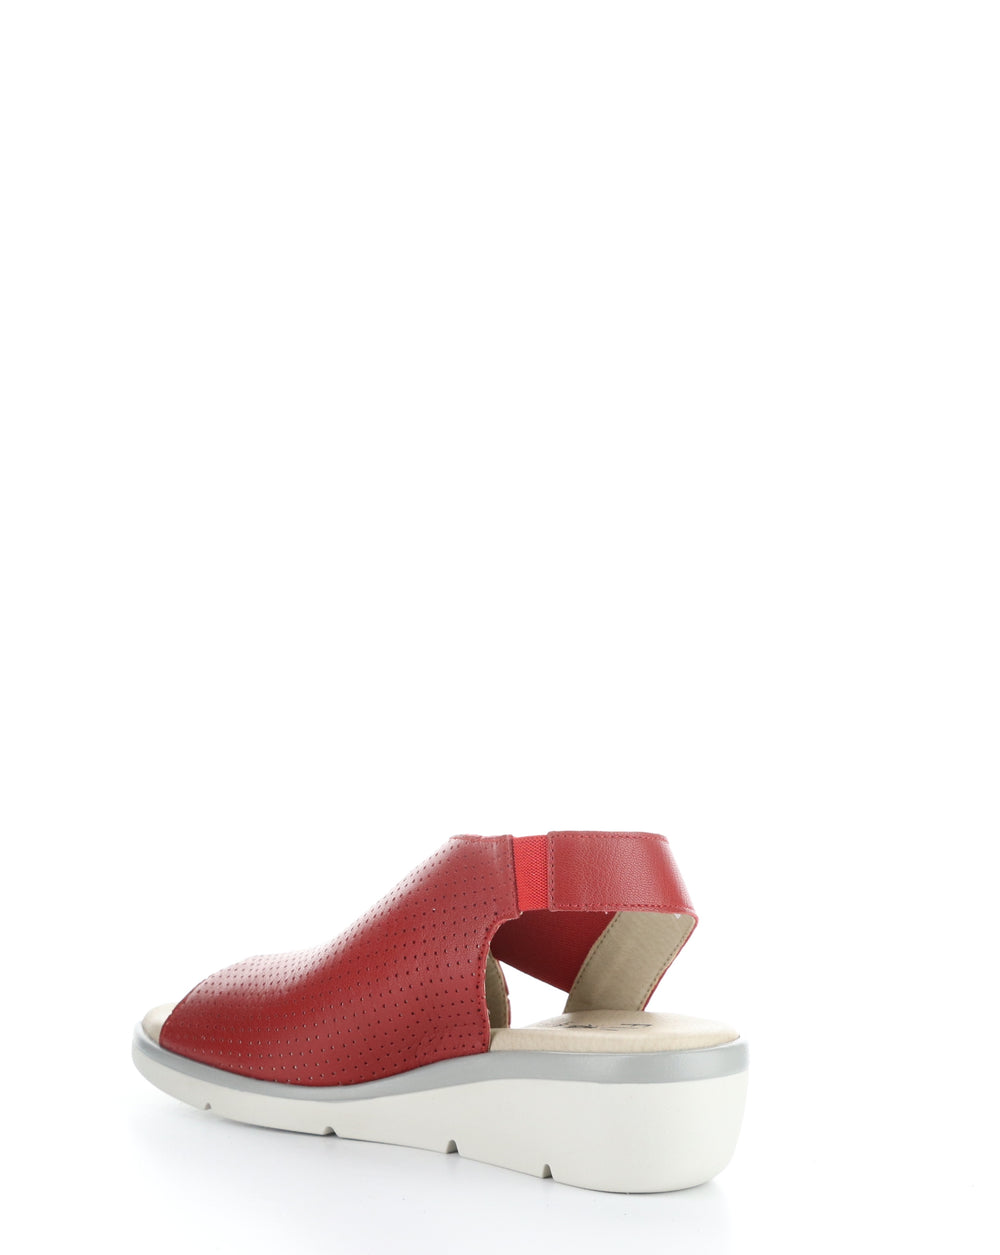 NISI066FLY Red Elasticated Sandals